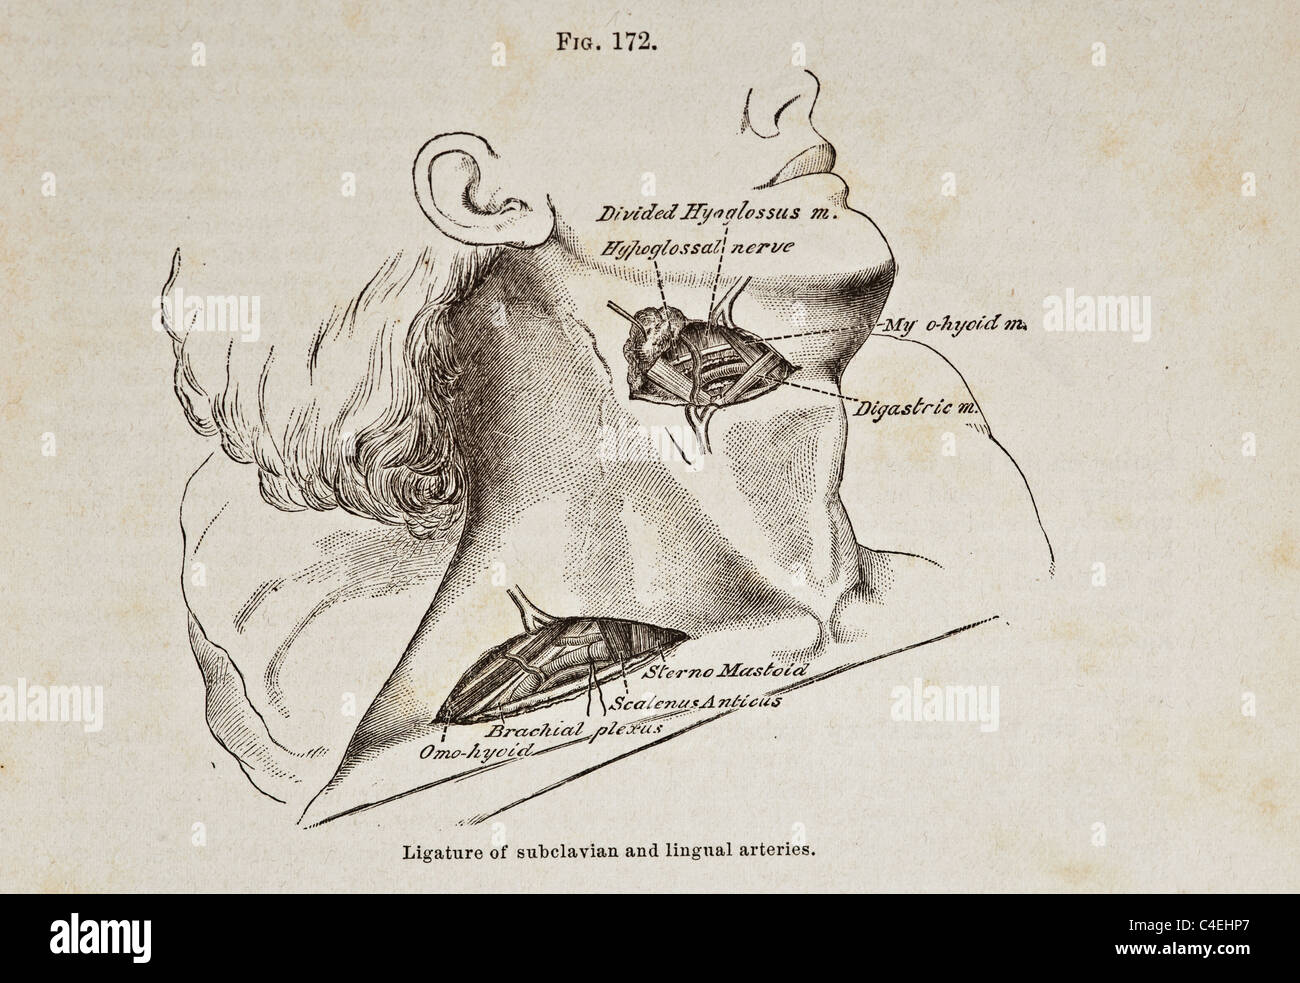 Antique Medical Illustration of Ligature of Subclavian and Lingual Arteries circa 1881 Stock Photo